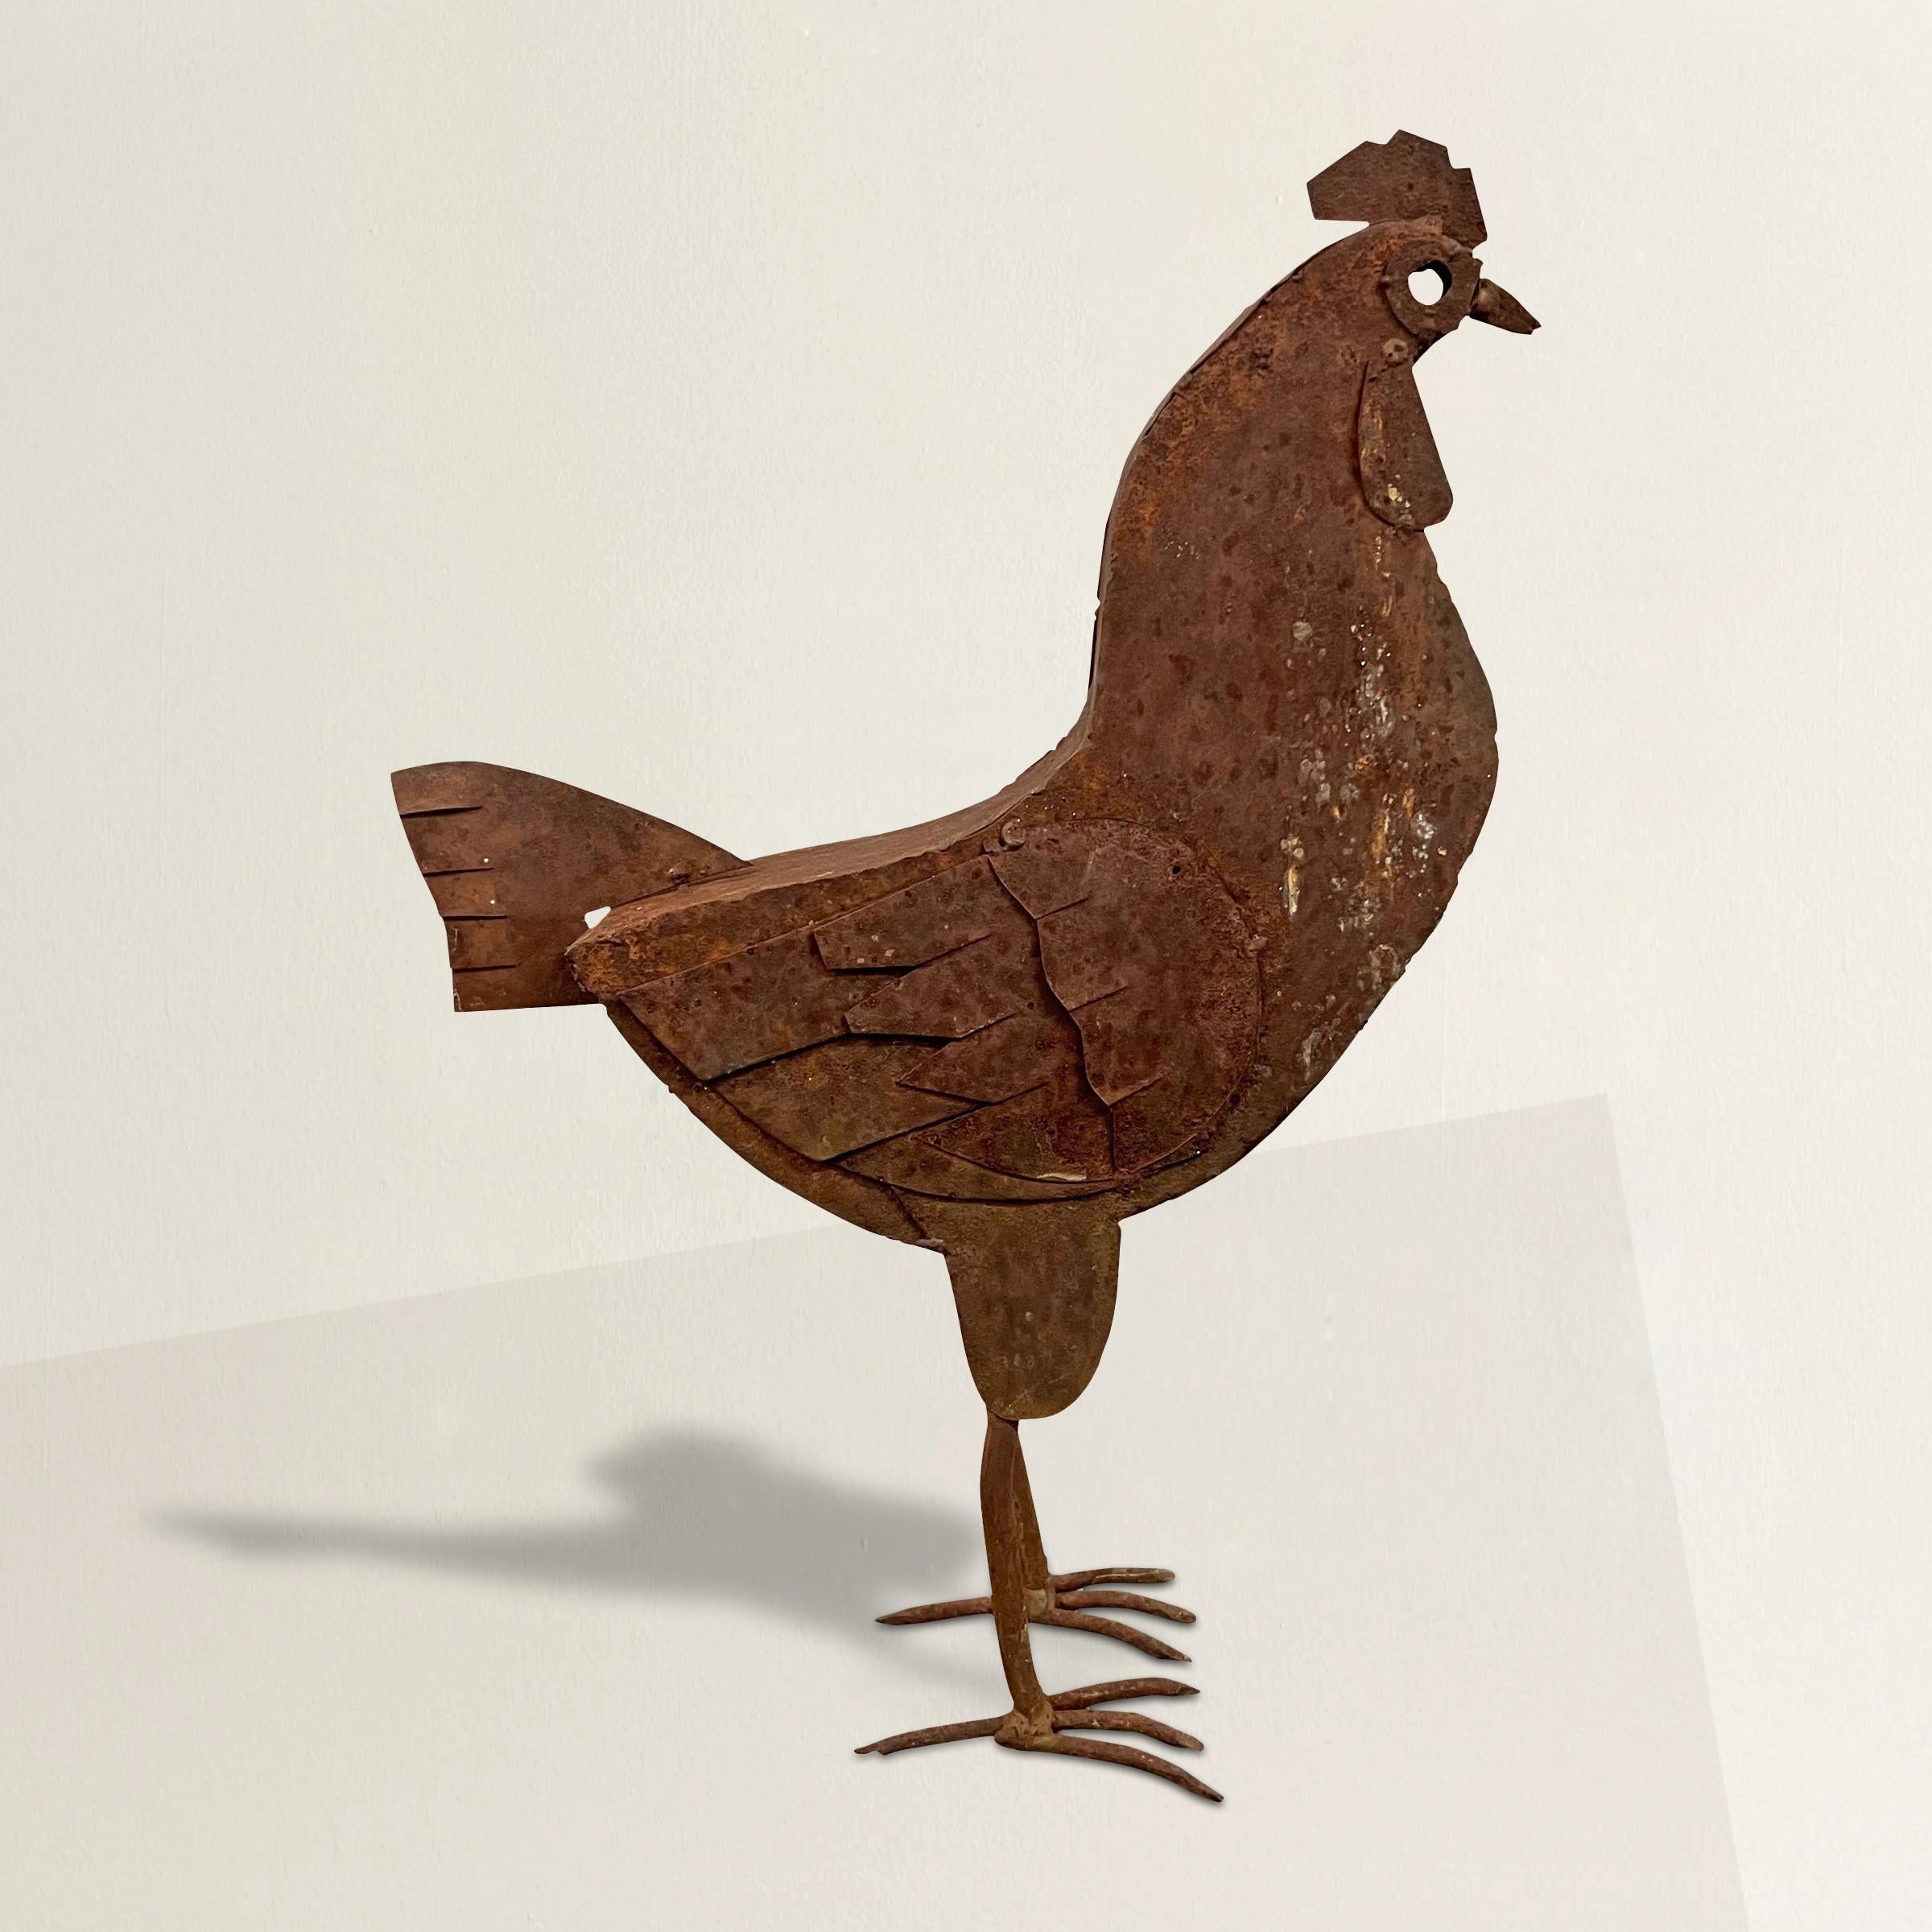 A mischievous 20th century American folk art rooster sculpture with a wonderful disposition, and beautiful rusted finish. Perfect indoors or out!